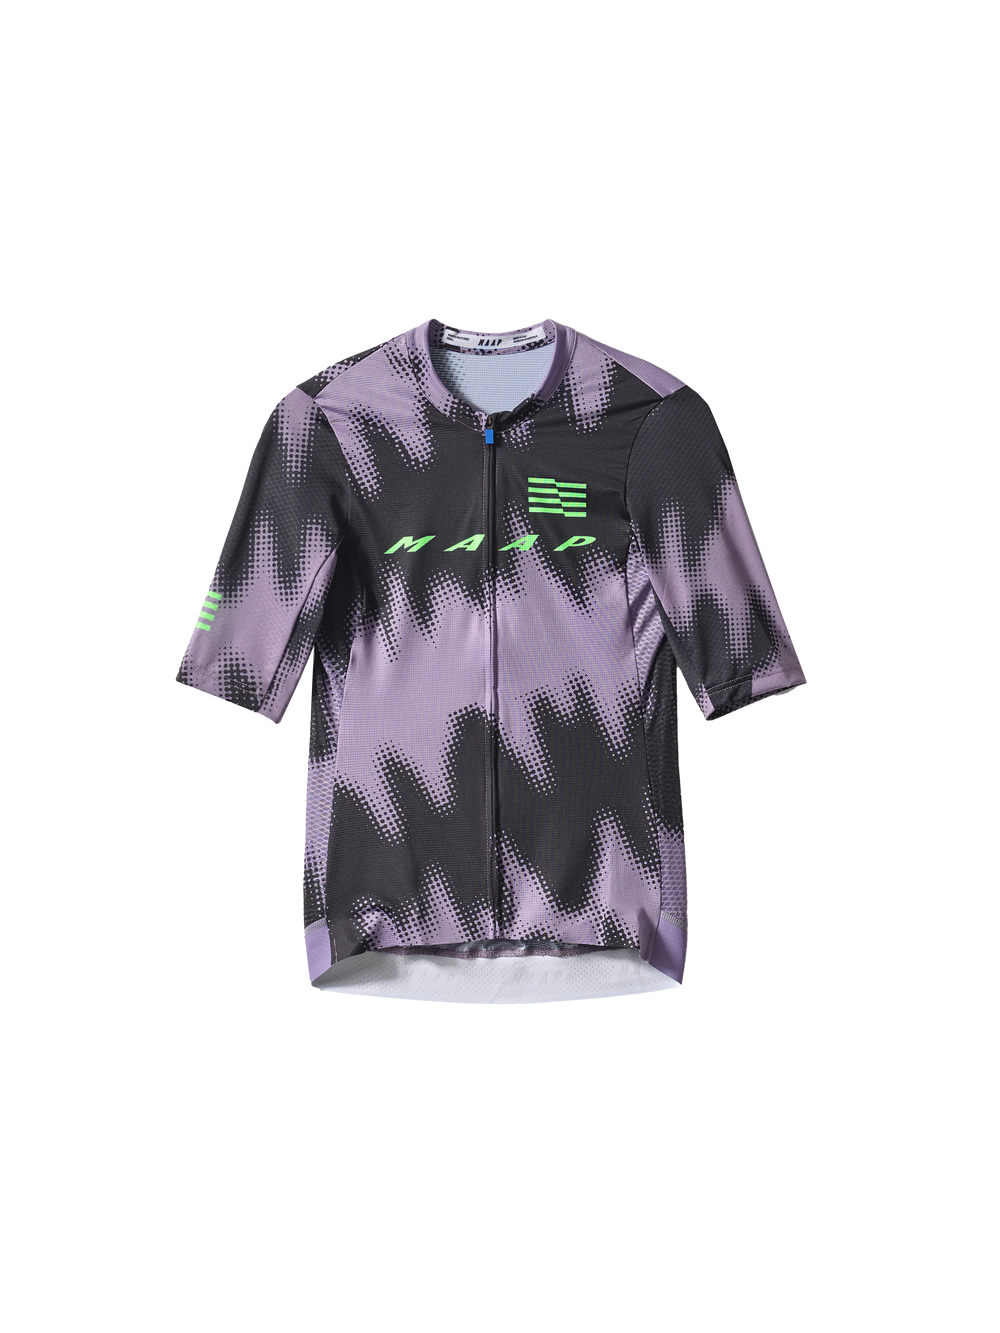 Product Image for Women's LPW Pro Air Jersey 2.0